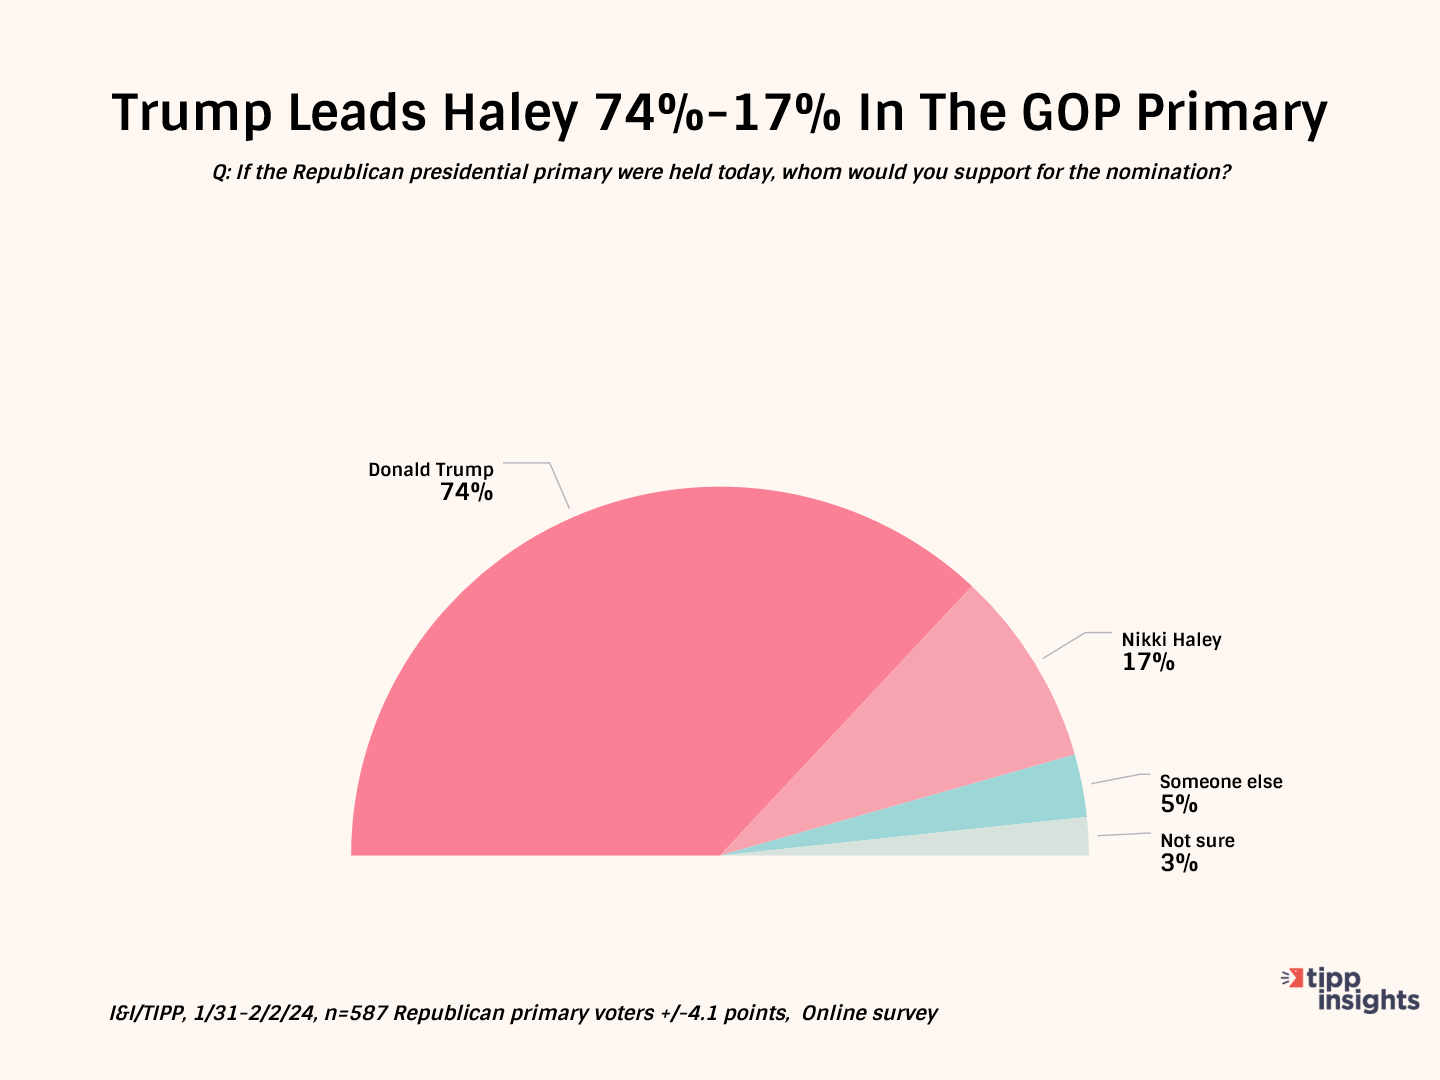 Frustrated Independents Give Trump An Edge Over Biden In 2024: I&I/TIPP Poll